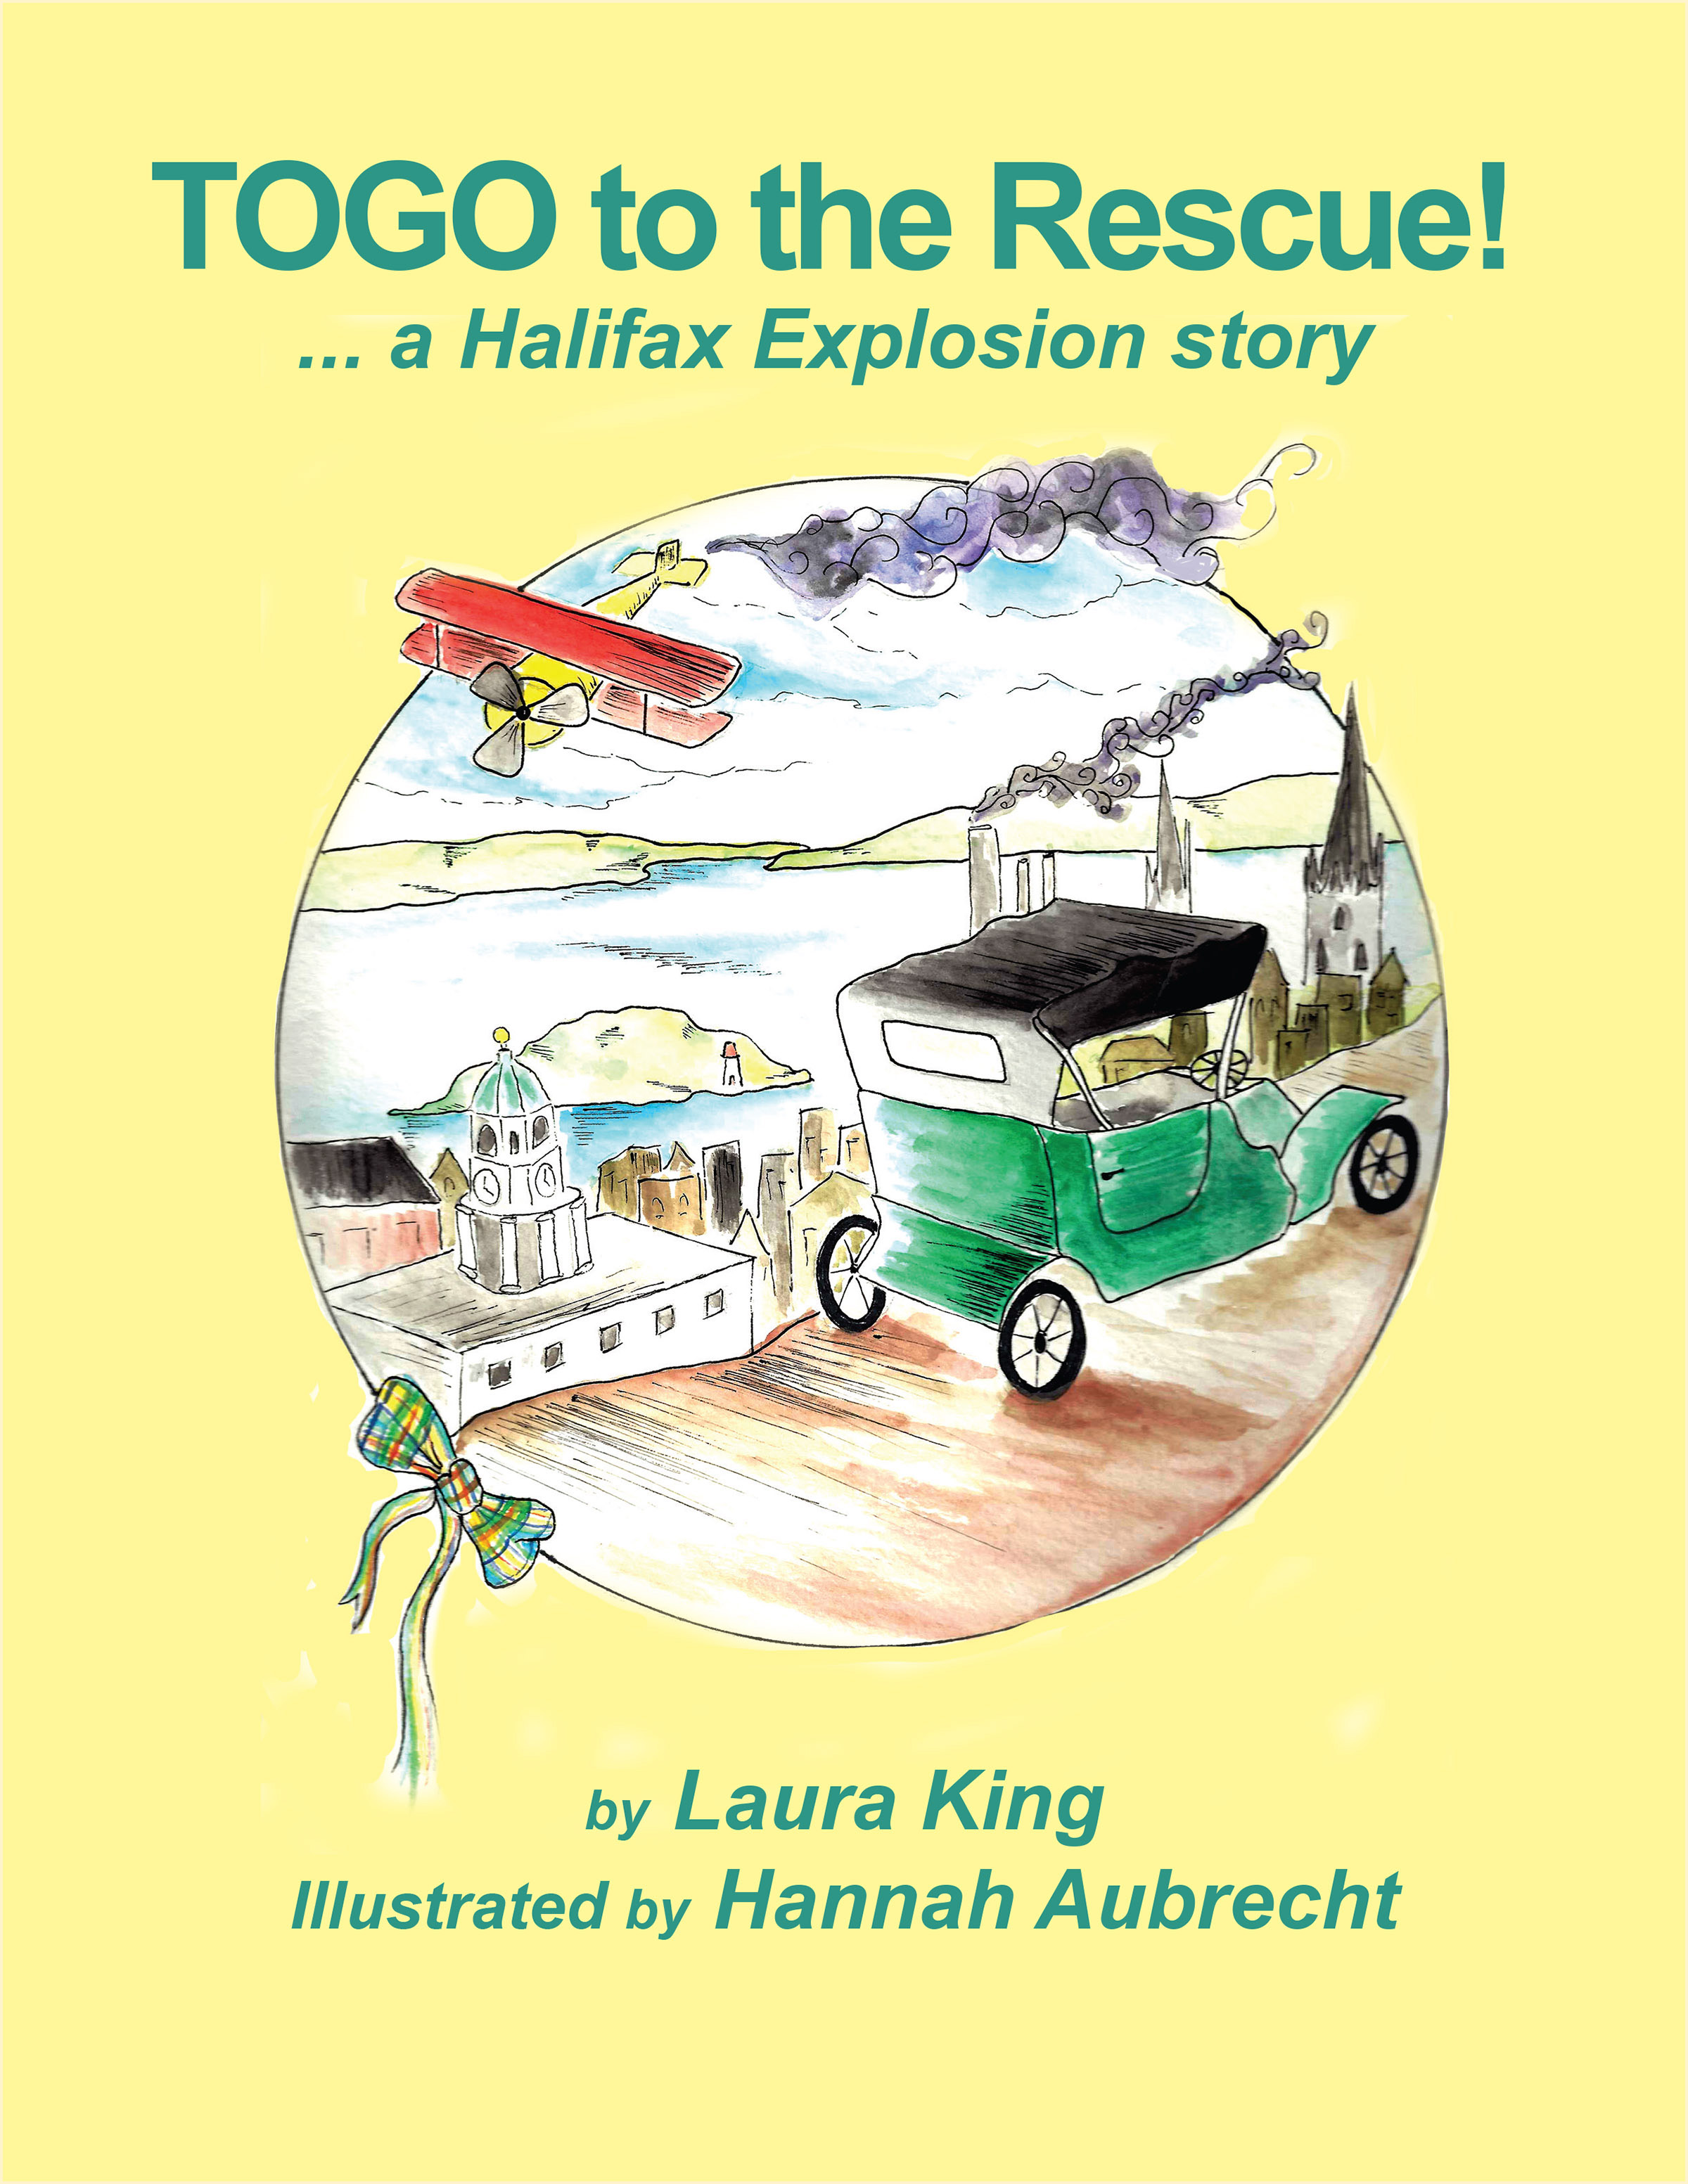 TOGO’ to the rescue – a Halifax Explosion Story